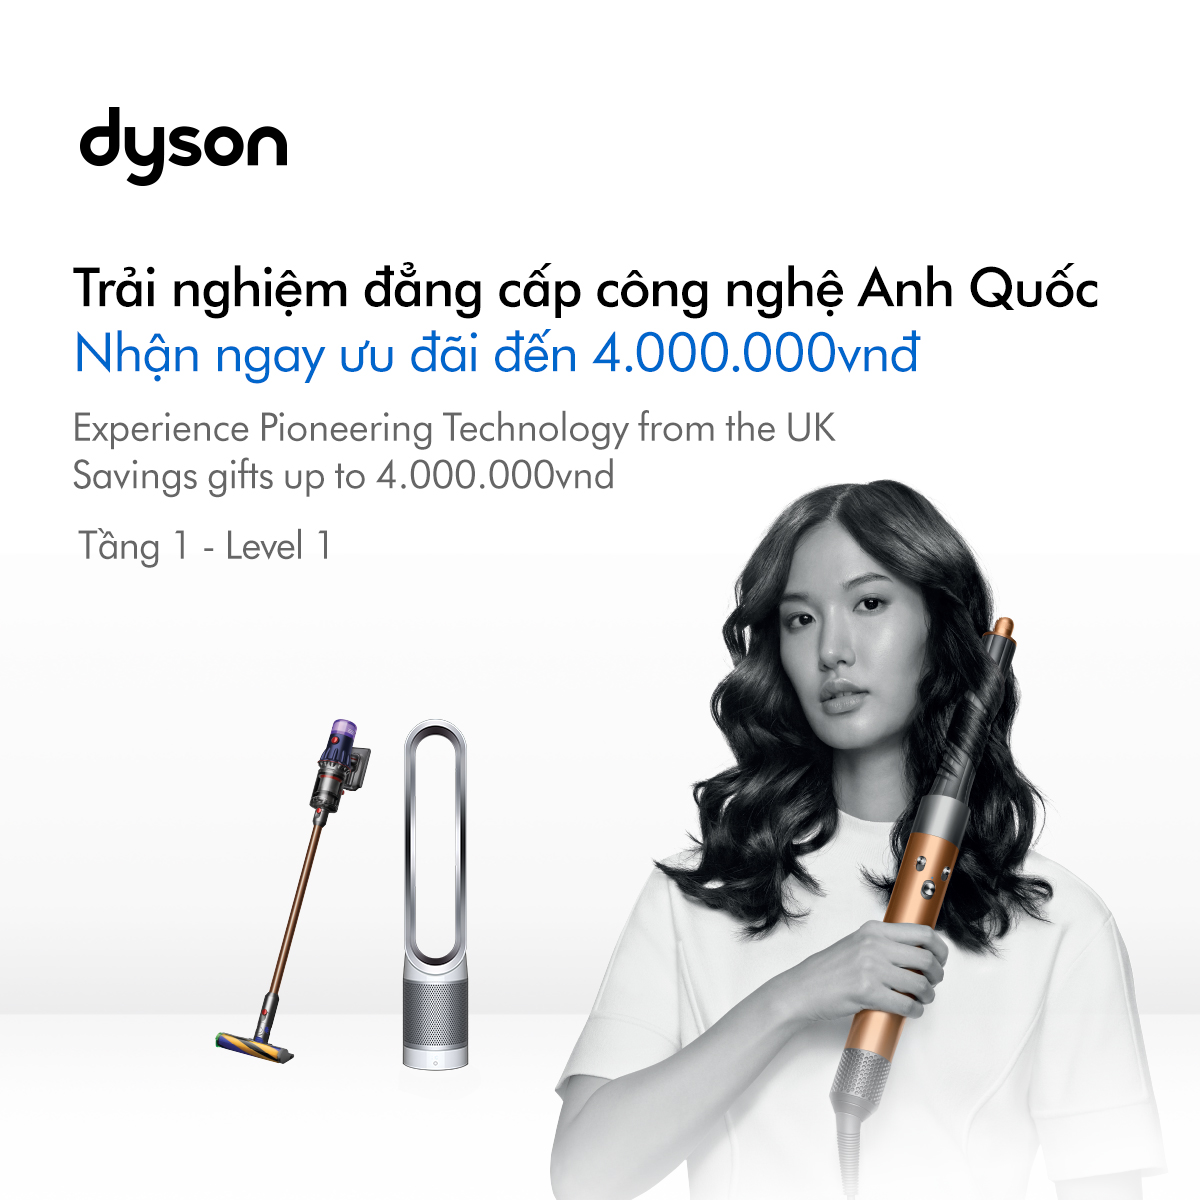 🎃EXPERIENCE THE UK TECHNOLOGY WITH DYSON - SAVING GIFTS UP TO VND 4,000,000🎃